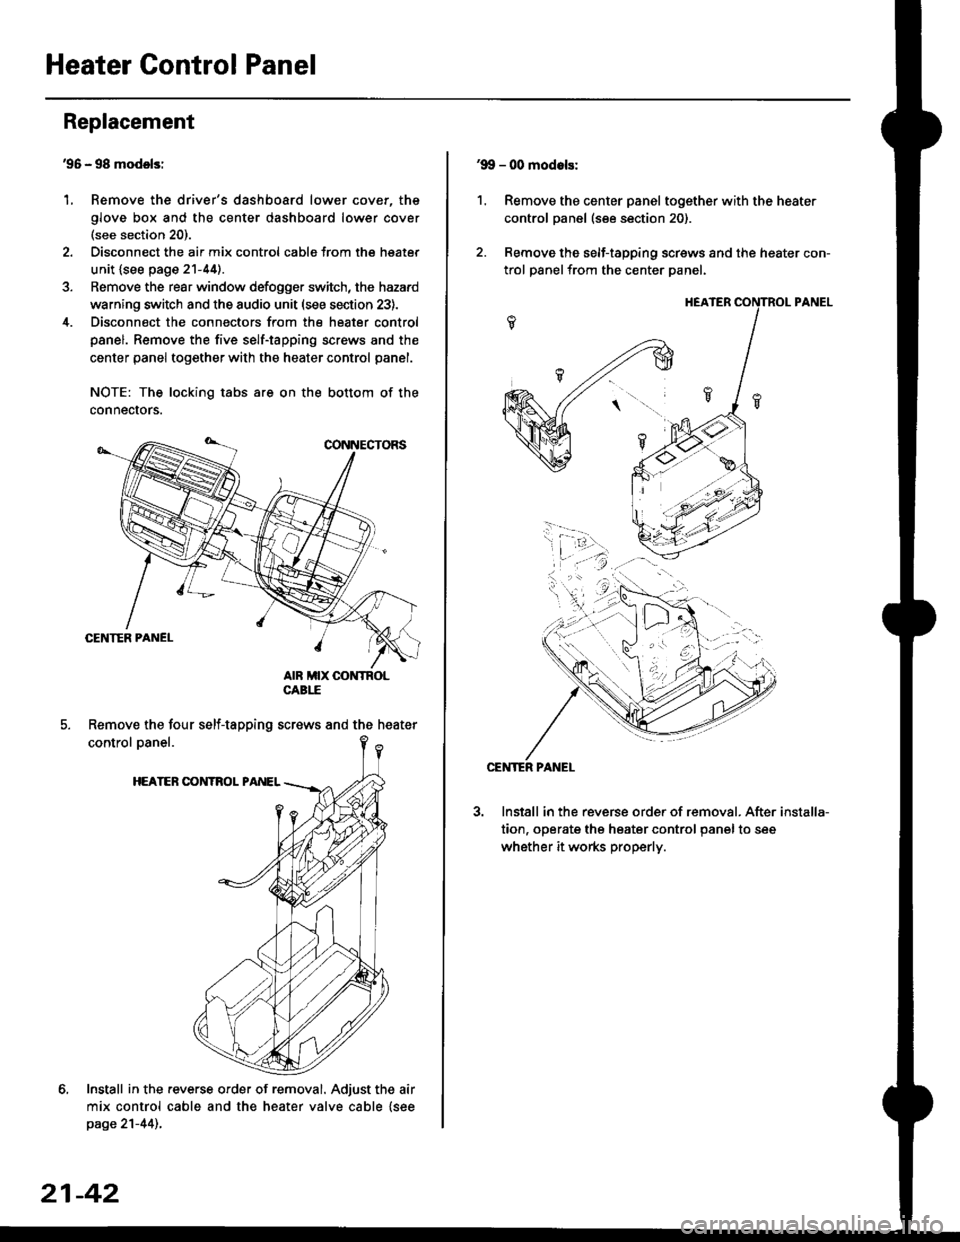 HONDA CIVIC 1997 6.G User Guide Heater Control Panel
95 - 98 modolsi
Remove the drivers dashboard lower cover, the
glove box and the center dashboard lower cover(see section 20).
Disconnect the air mix control cabls from the heate